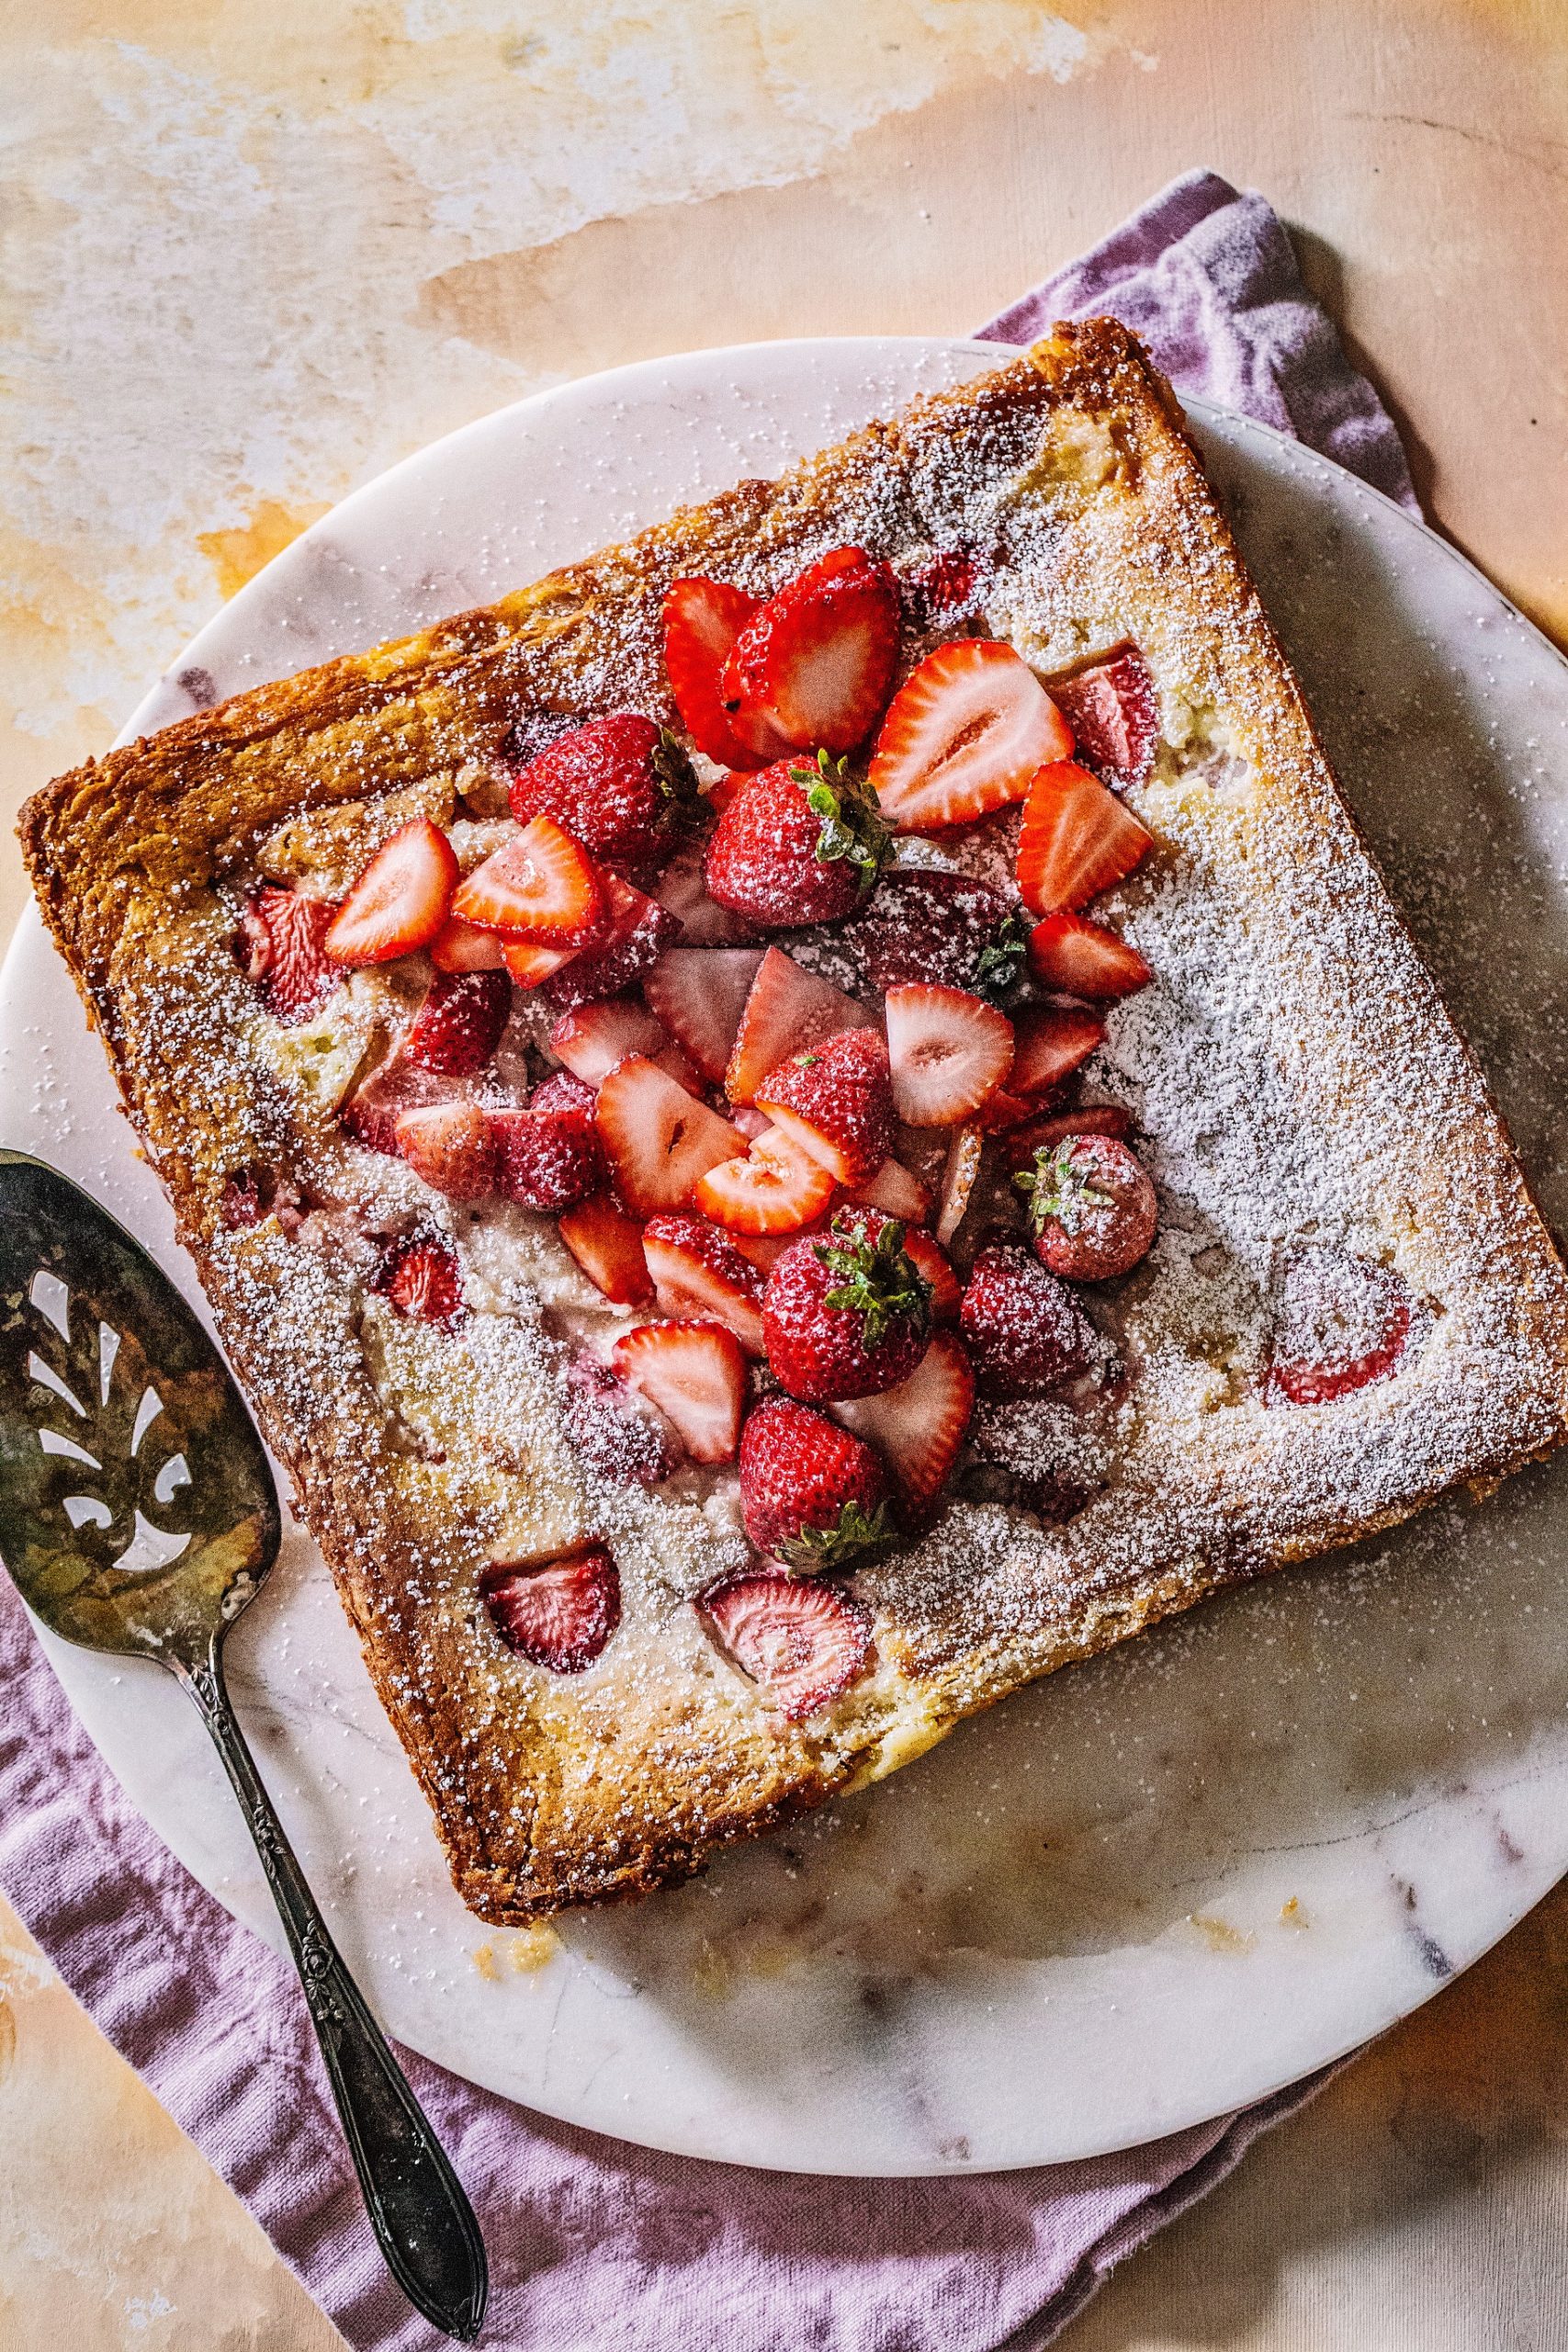 French Vanilla Gooey Butter Cake with Strawberries